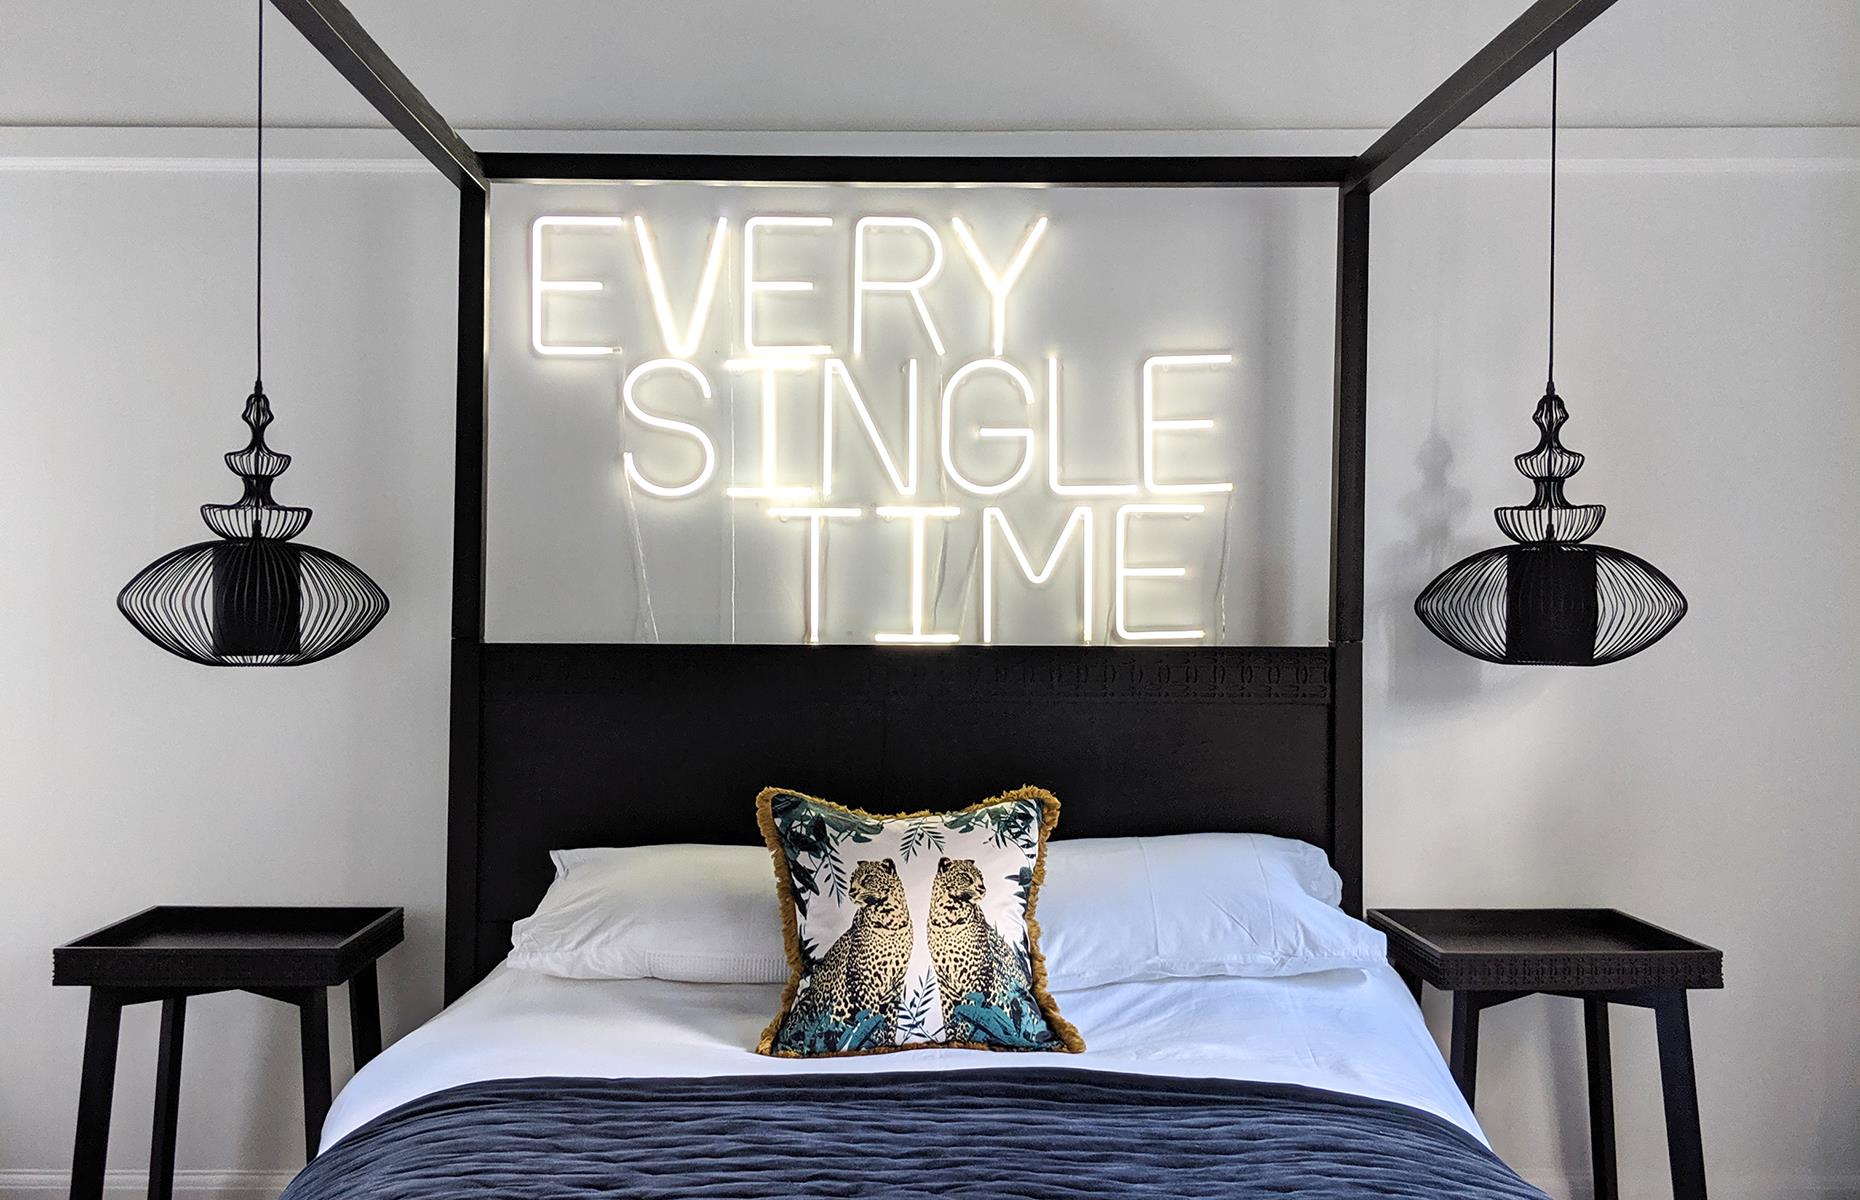 Bring neon lights into the bedroom